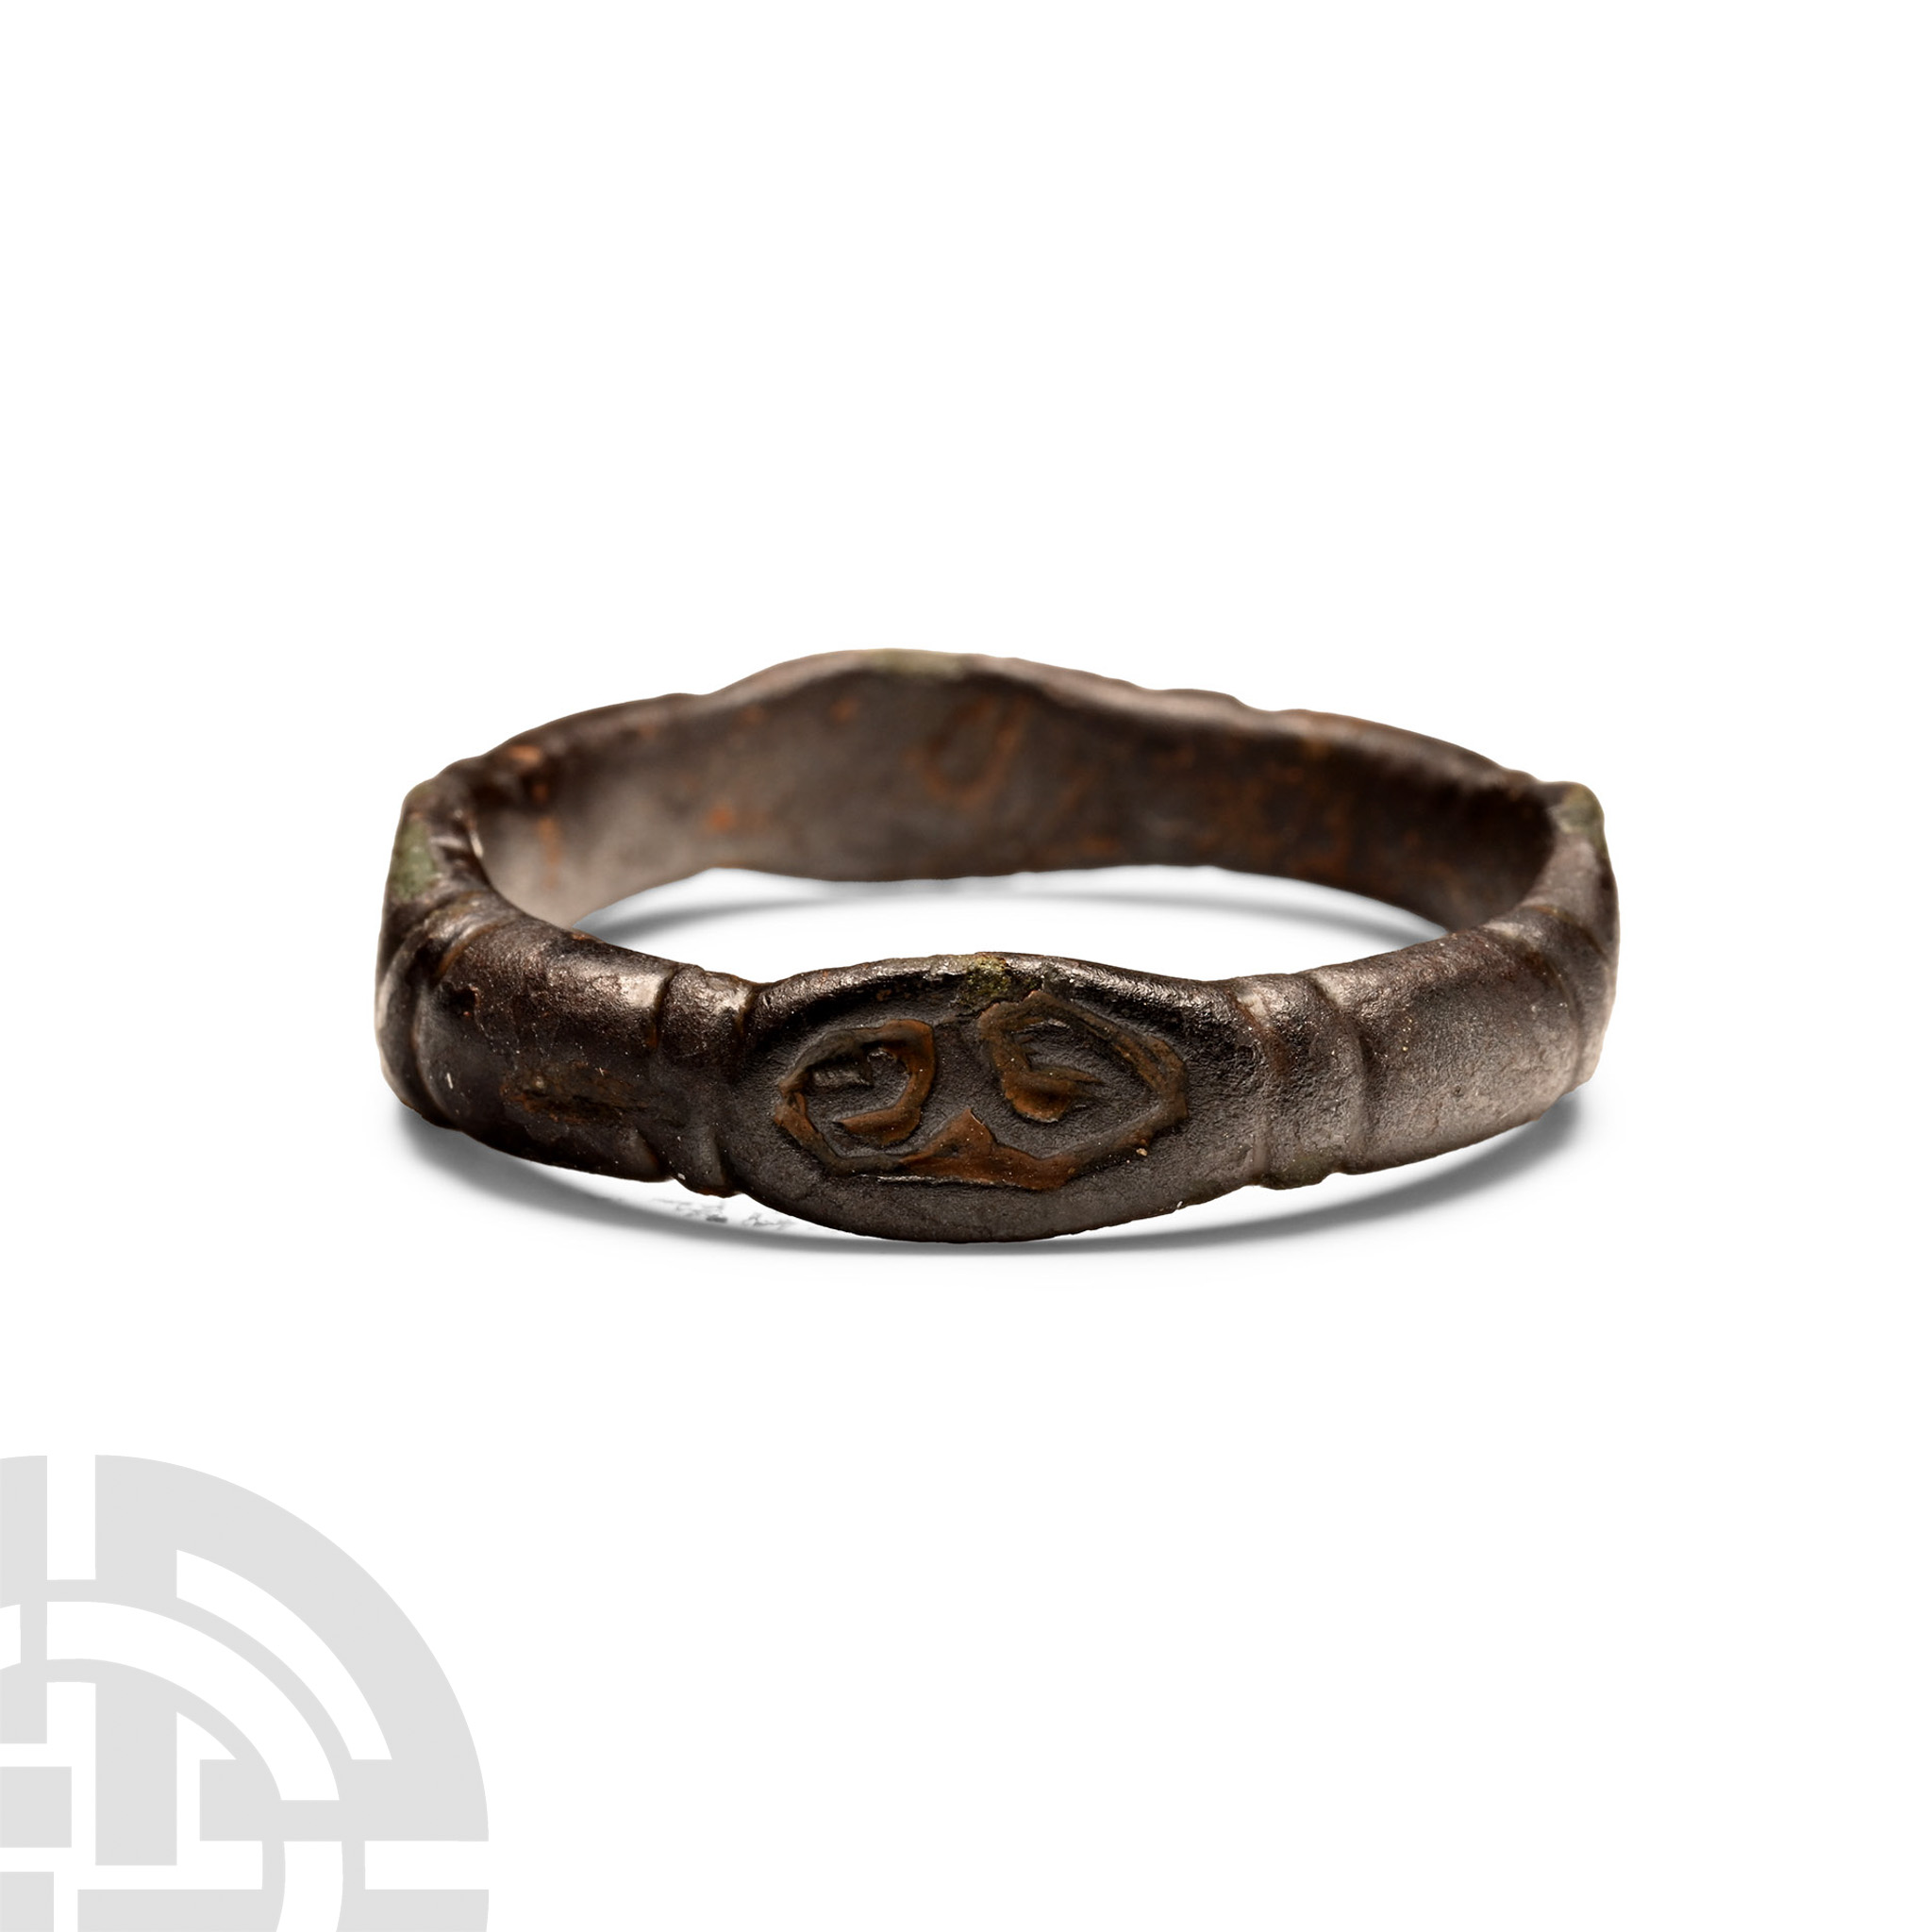 Late Anglo-Saxon Bronze Ring with Four Ovate Bezels - Image 3 of 3